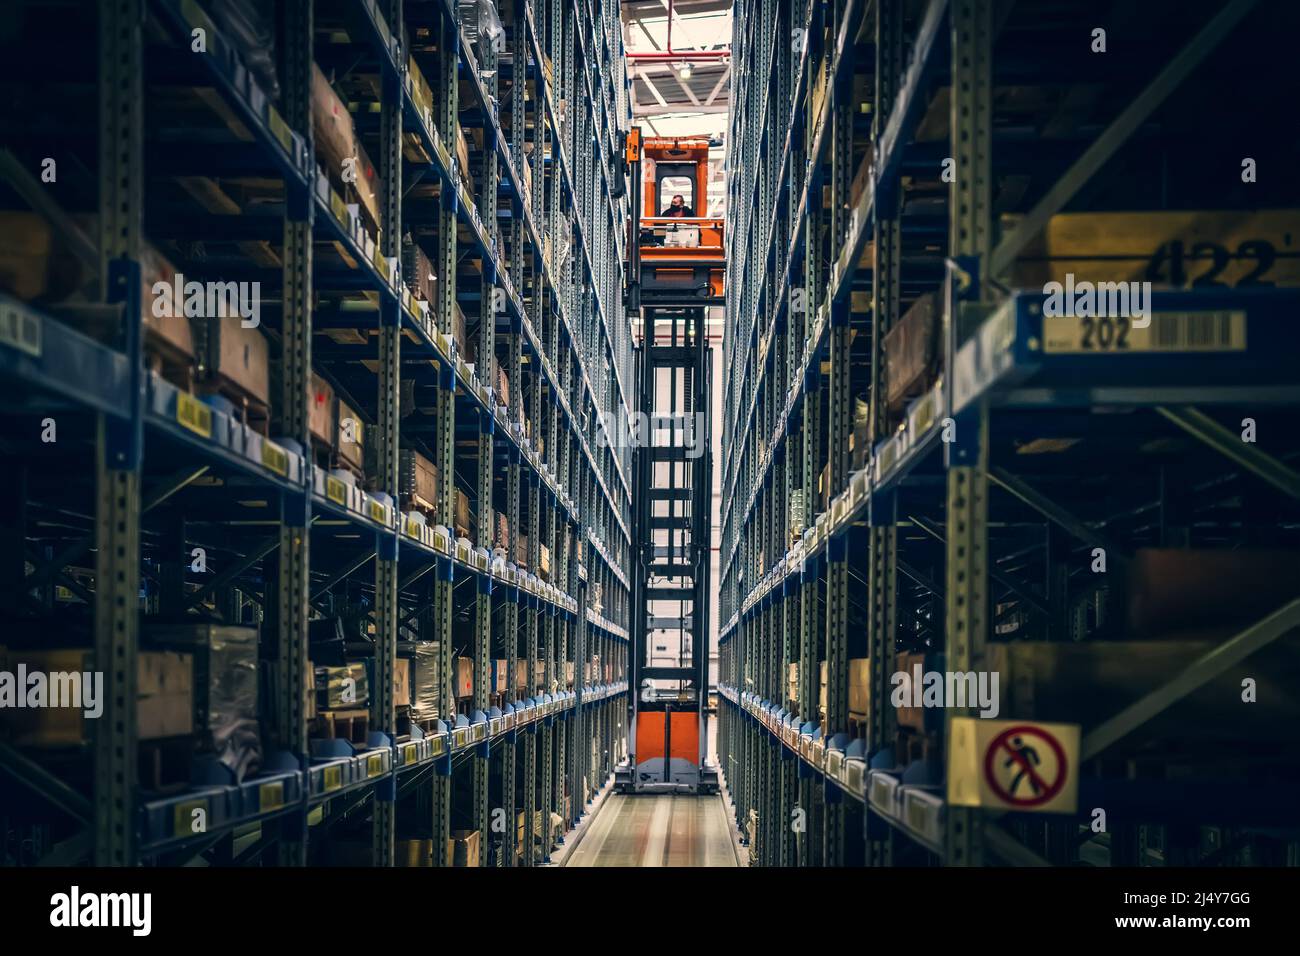 Modern distribution warehouse interior with many goods in boxes on shelves. Stock Photo